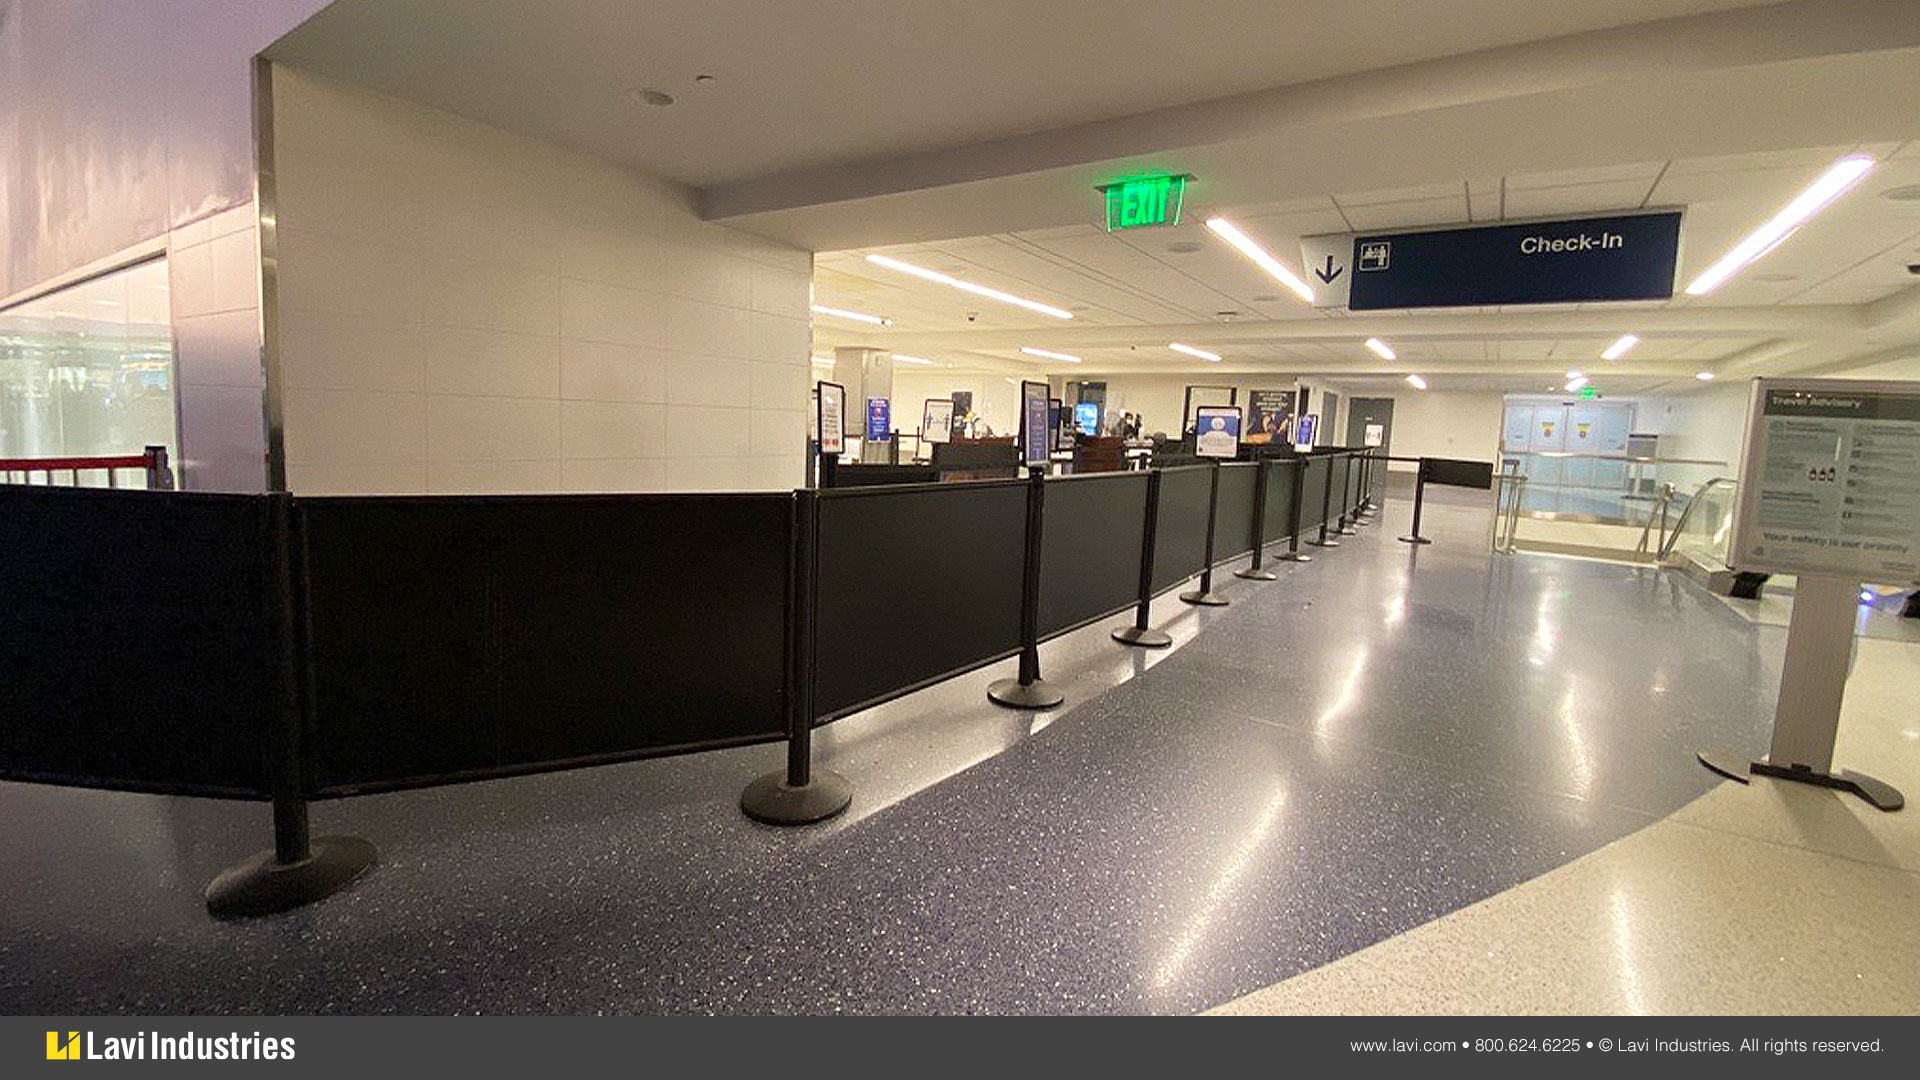 Airport,Barriers,Queuing,Stanchions,HingedFramePanels